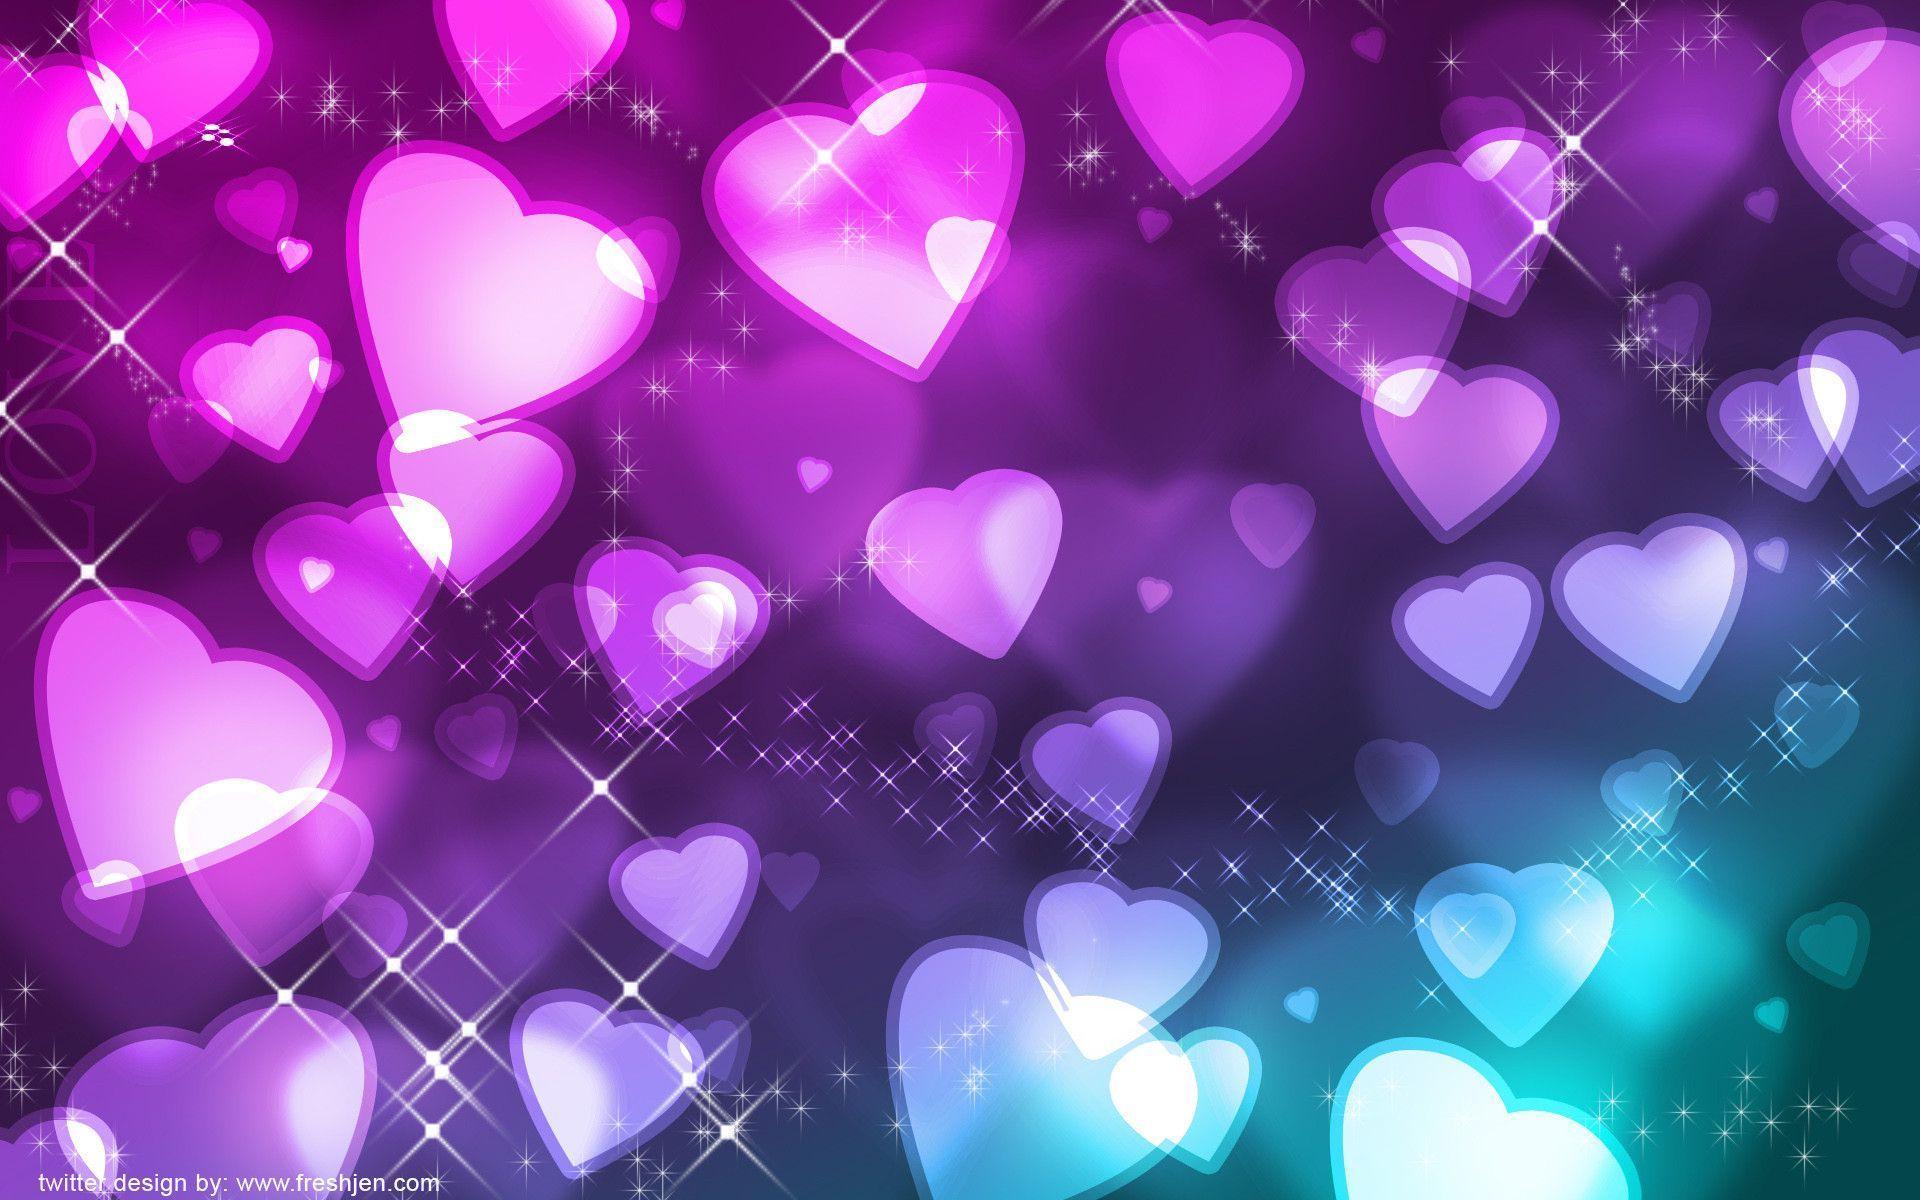 Wallpaper For > Rainbow Heart Background Designs